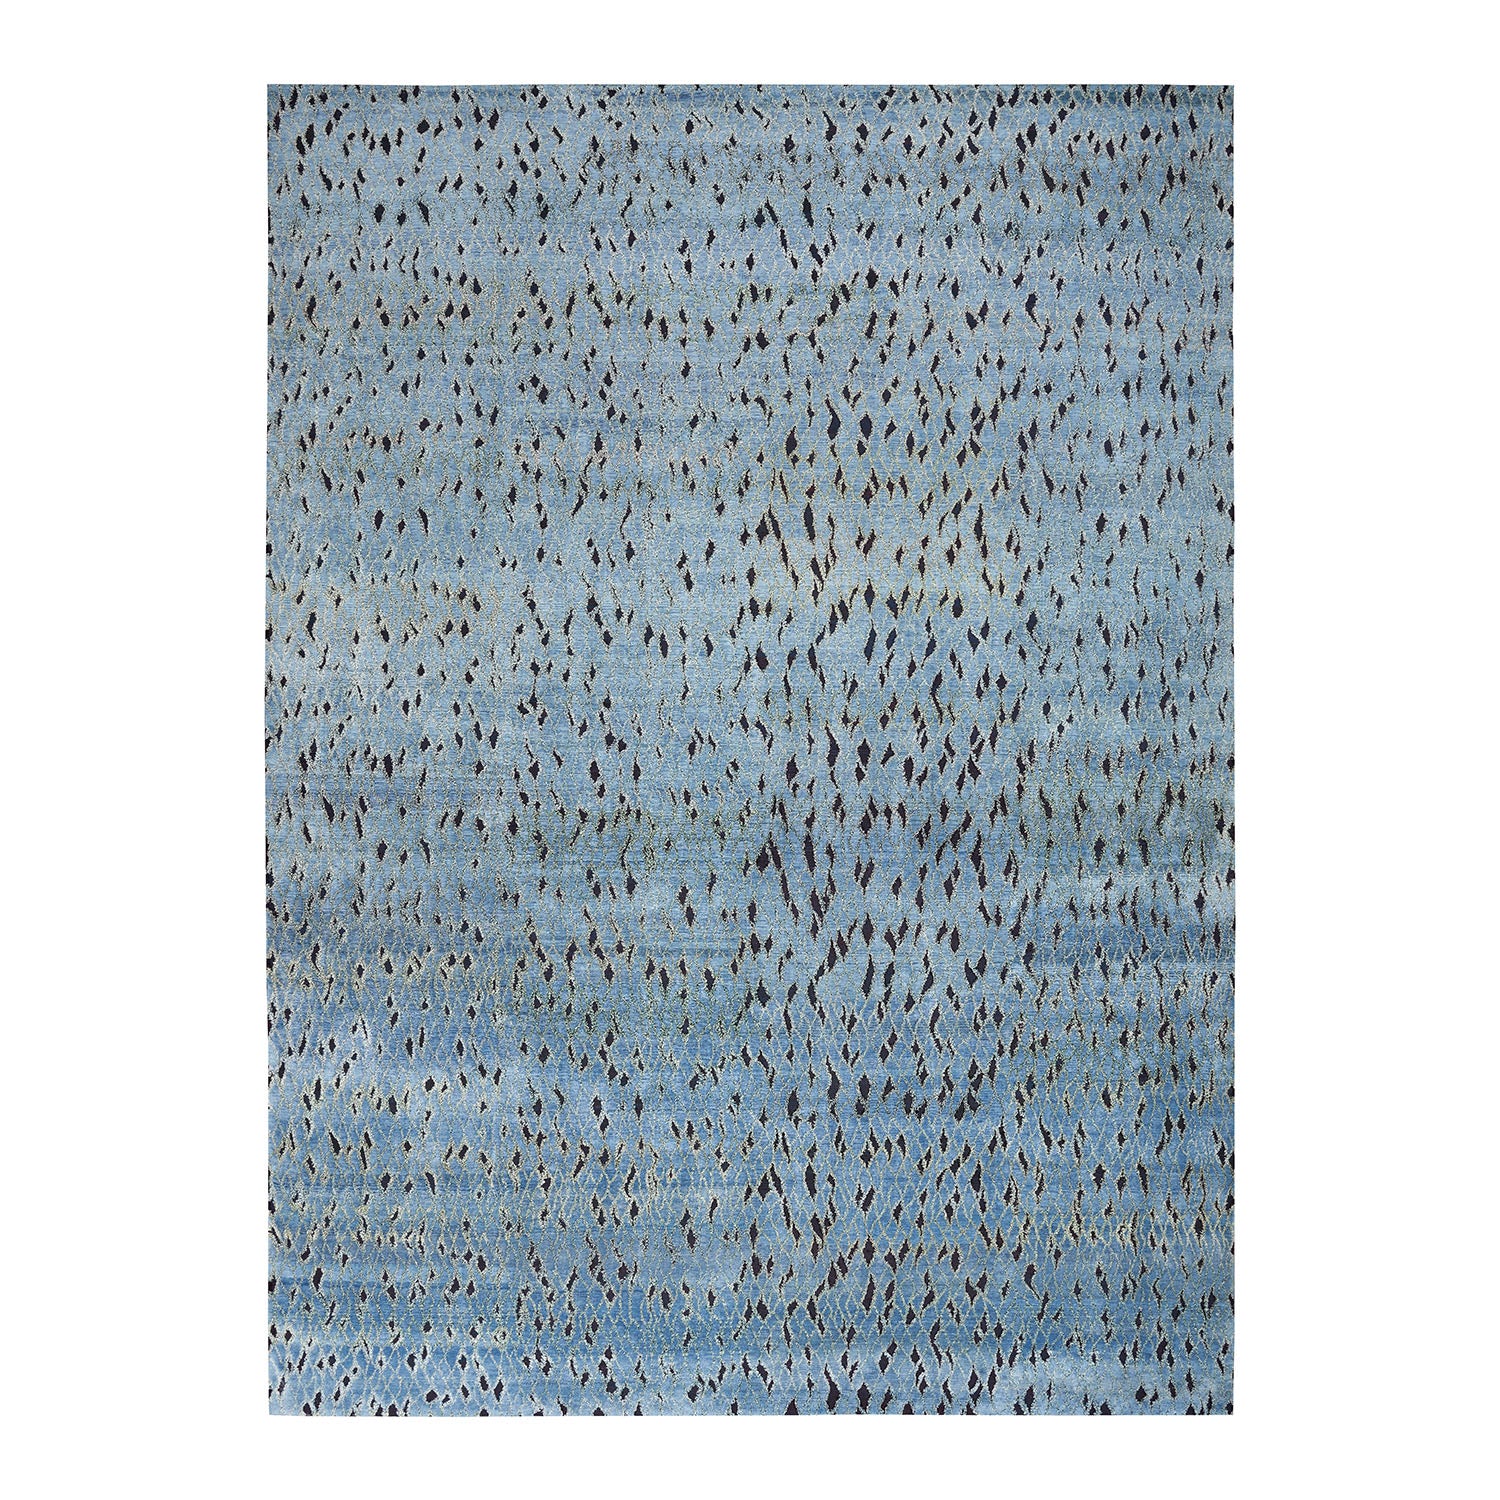 Abstract pattern featuring textured blue background with scattered darker splotches.